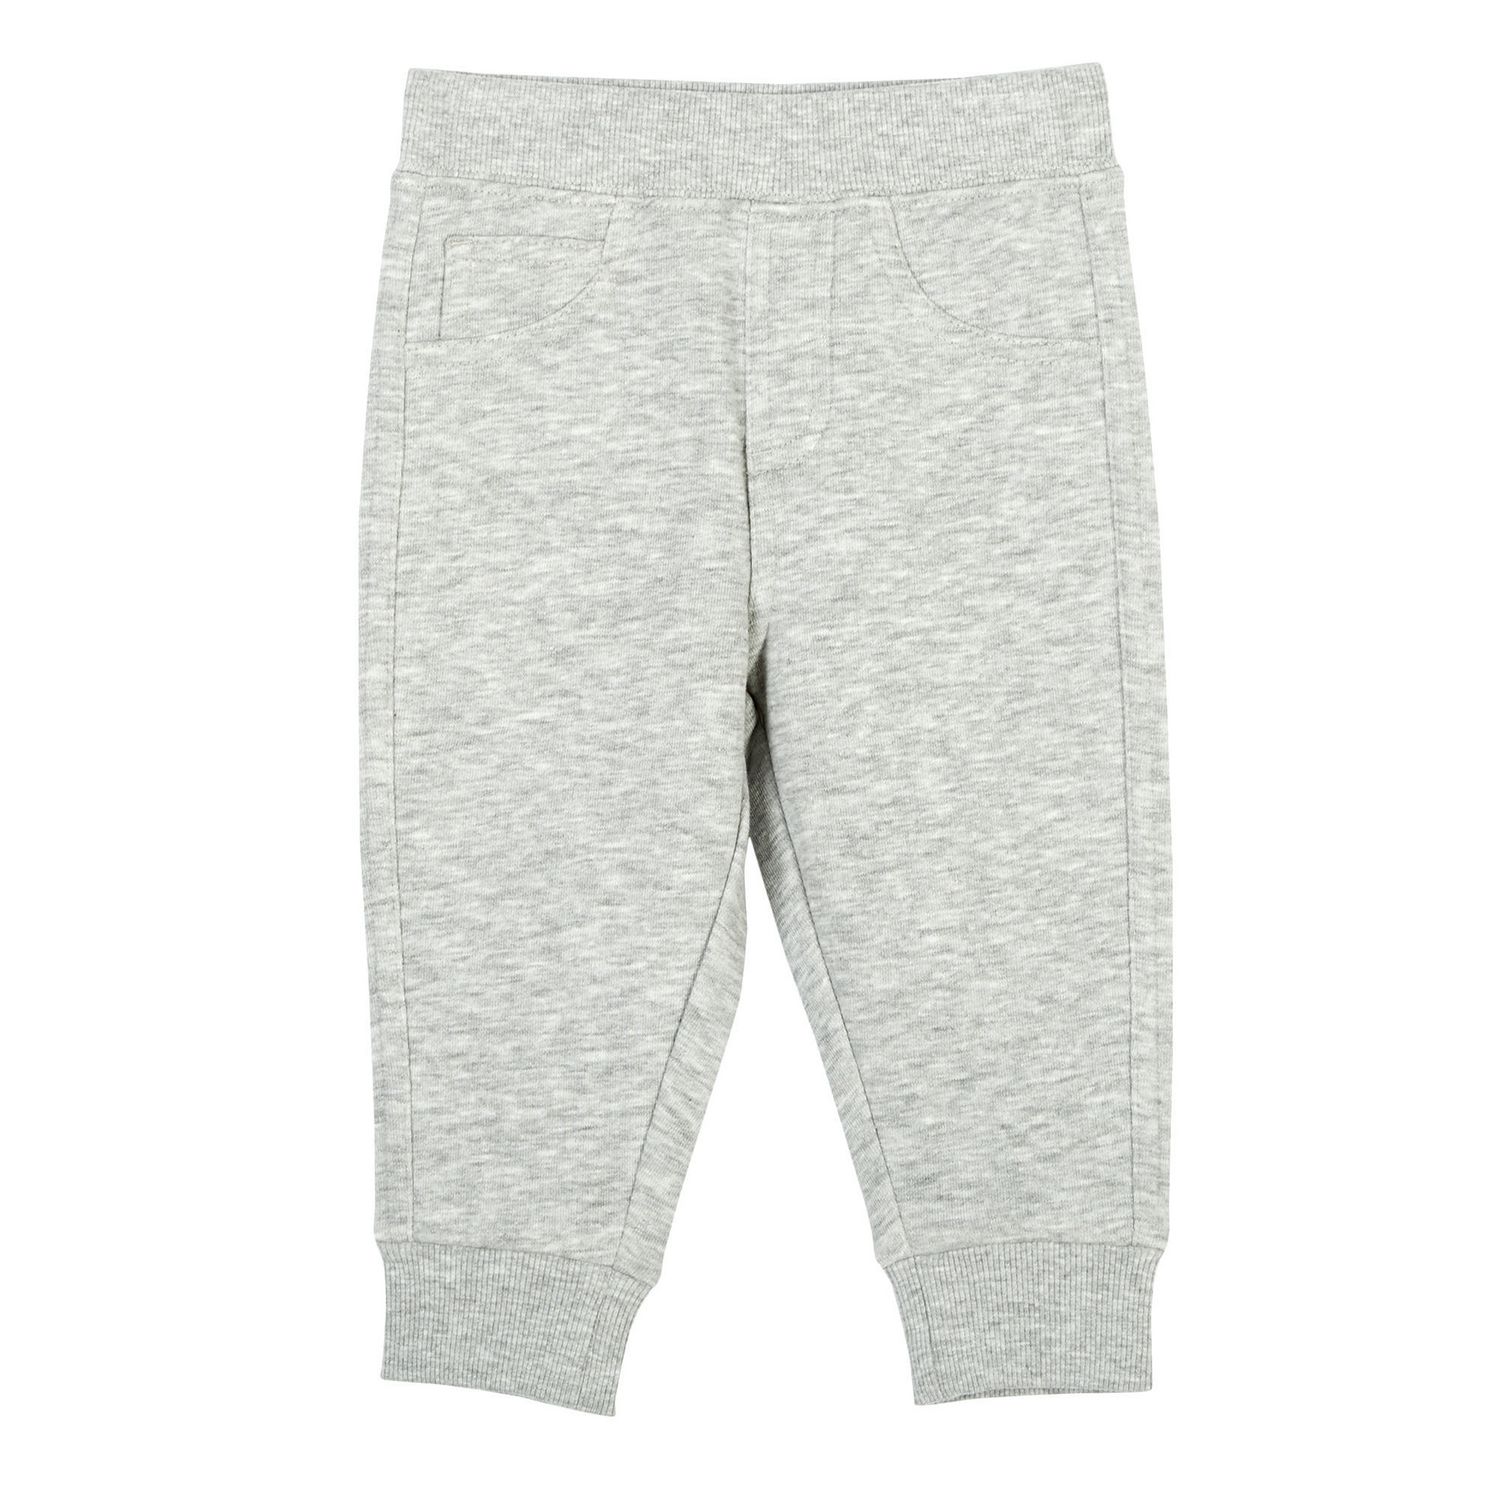 George Infant Girls' Terry Joggers | Walmart Canada